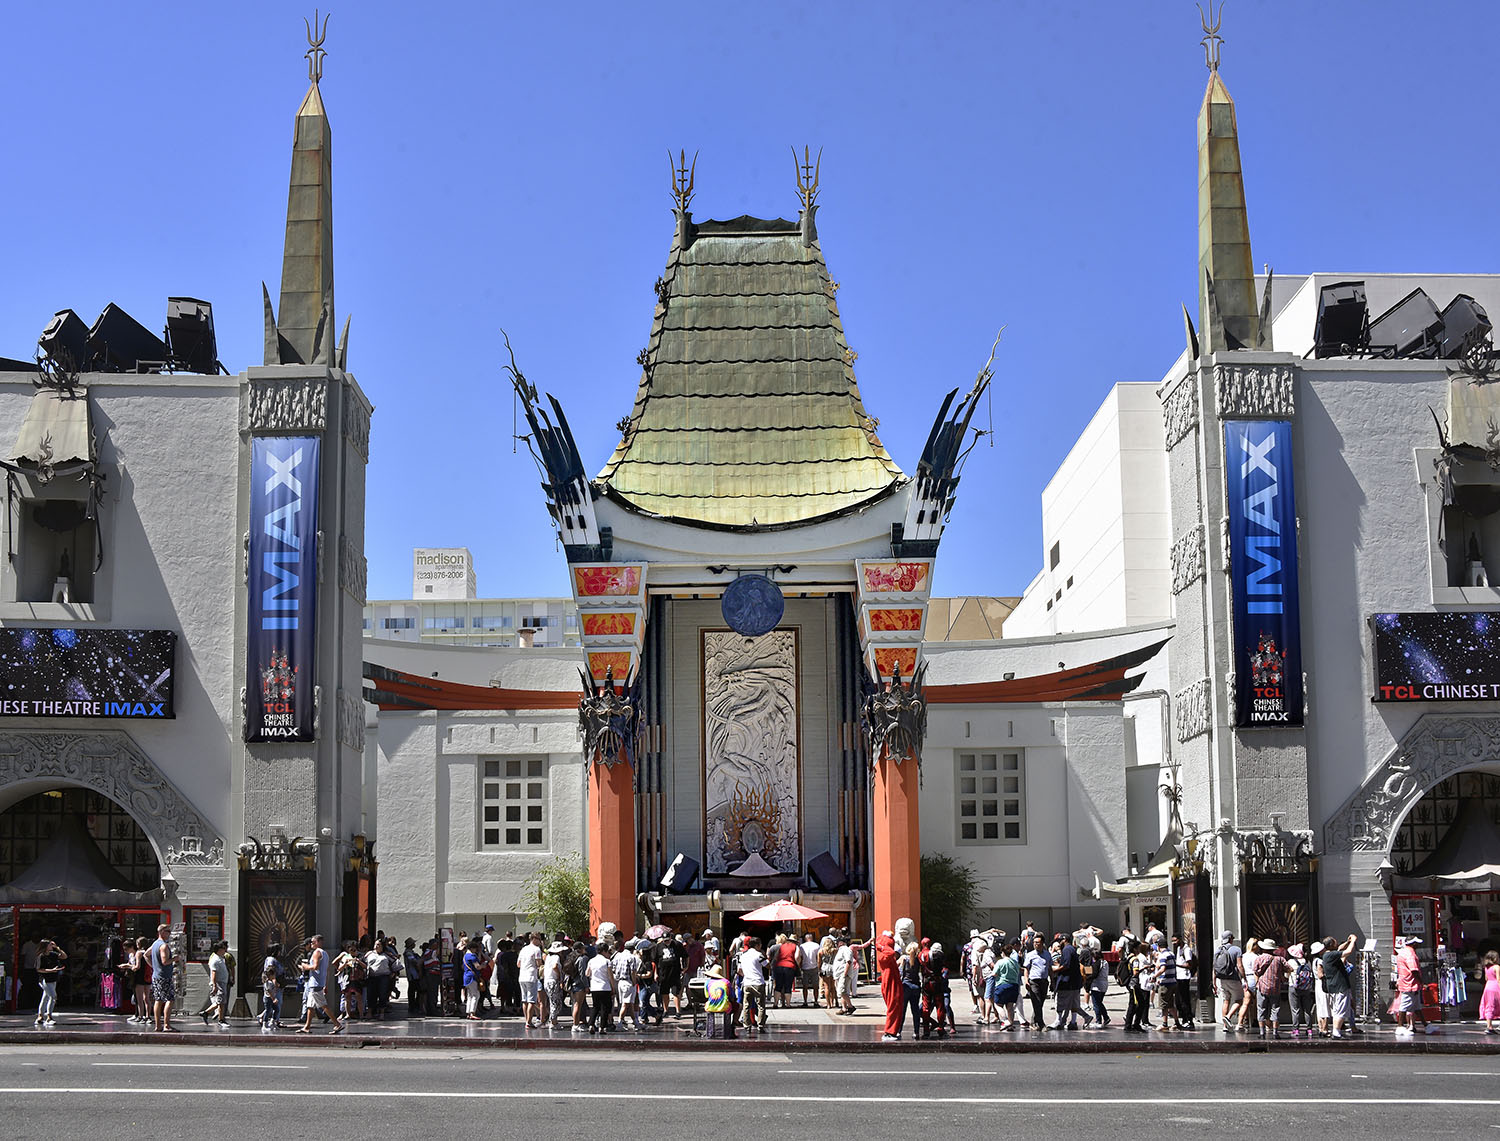 TCL Chinese Theatres (@chinesetheatres) • Instagram photos and videos